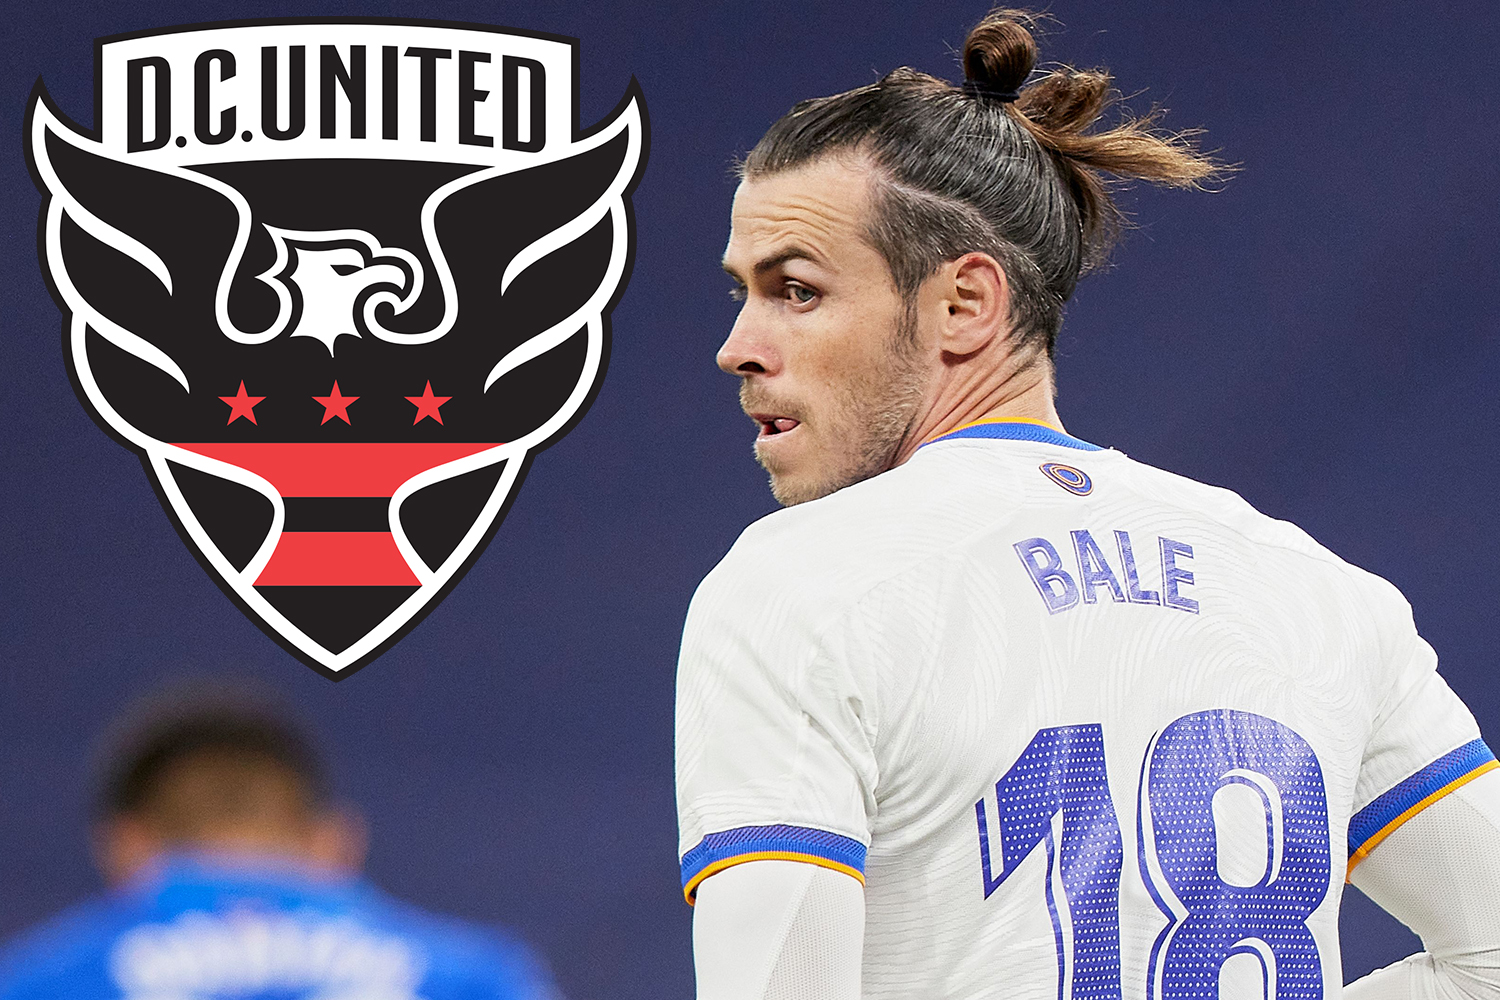 Bale ‘in talks’ to join DC United with MLS side to pay him more than Rooney